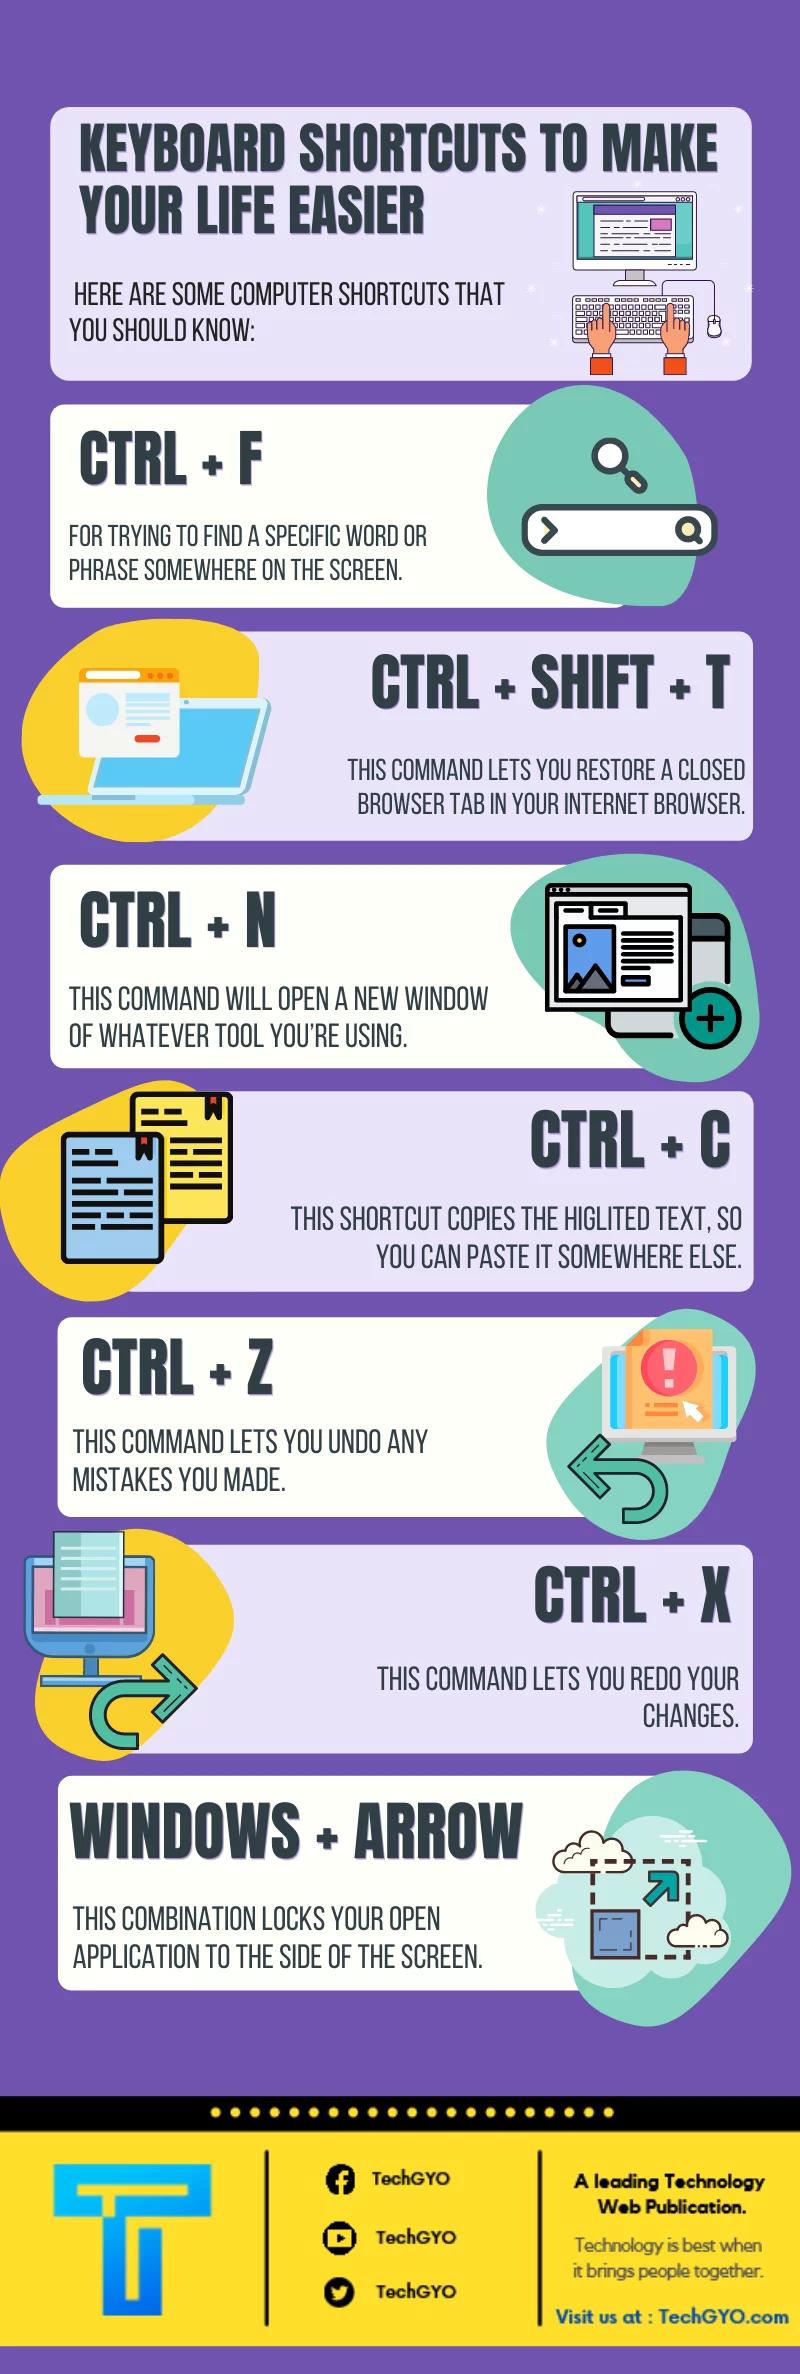 7 Keyboard Shortcuts To Make Your Life Easier